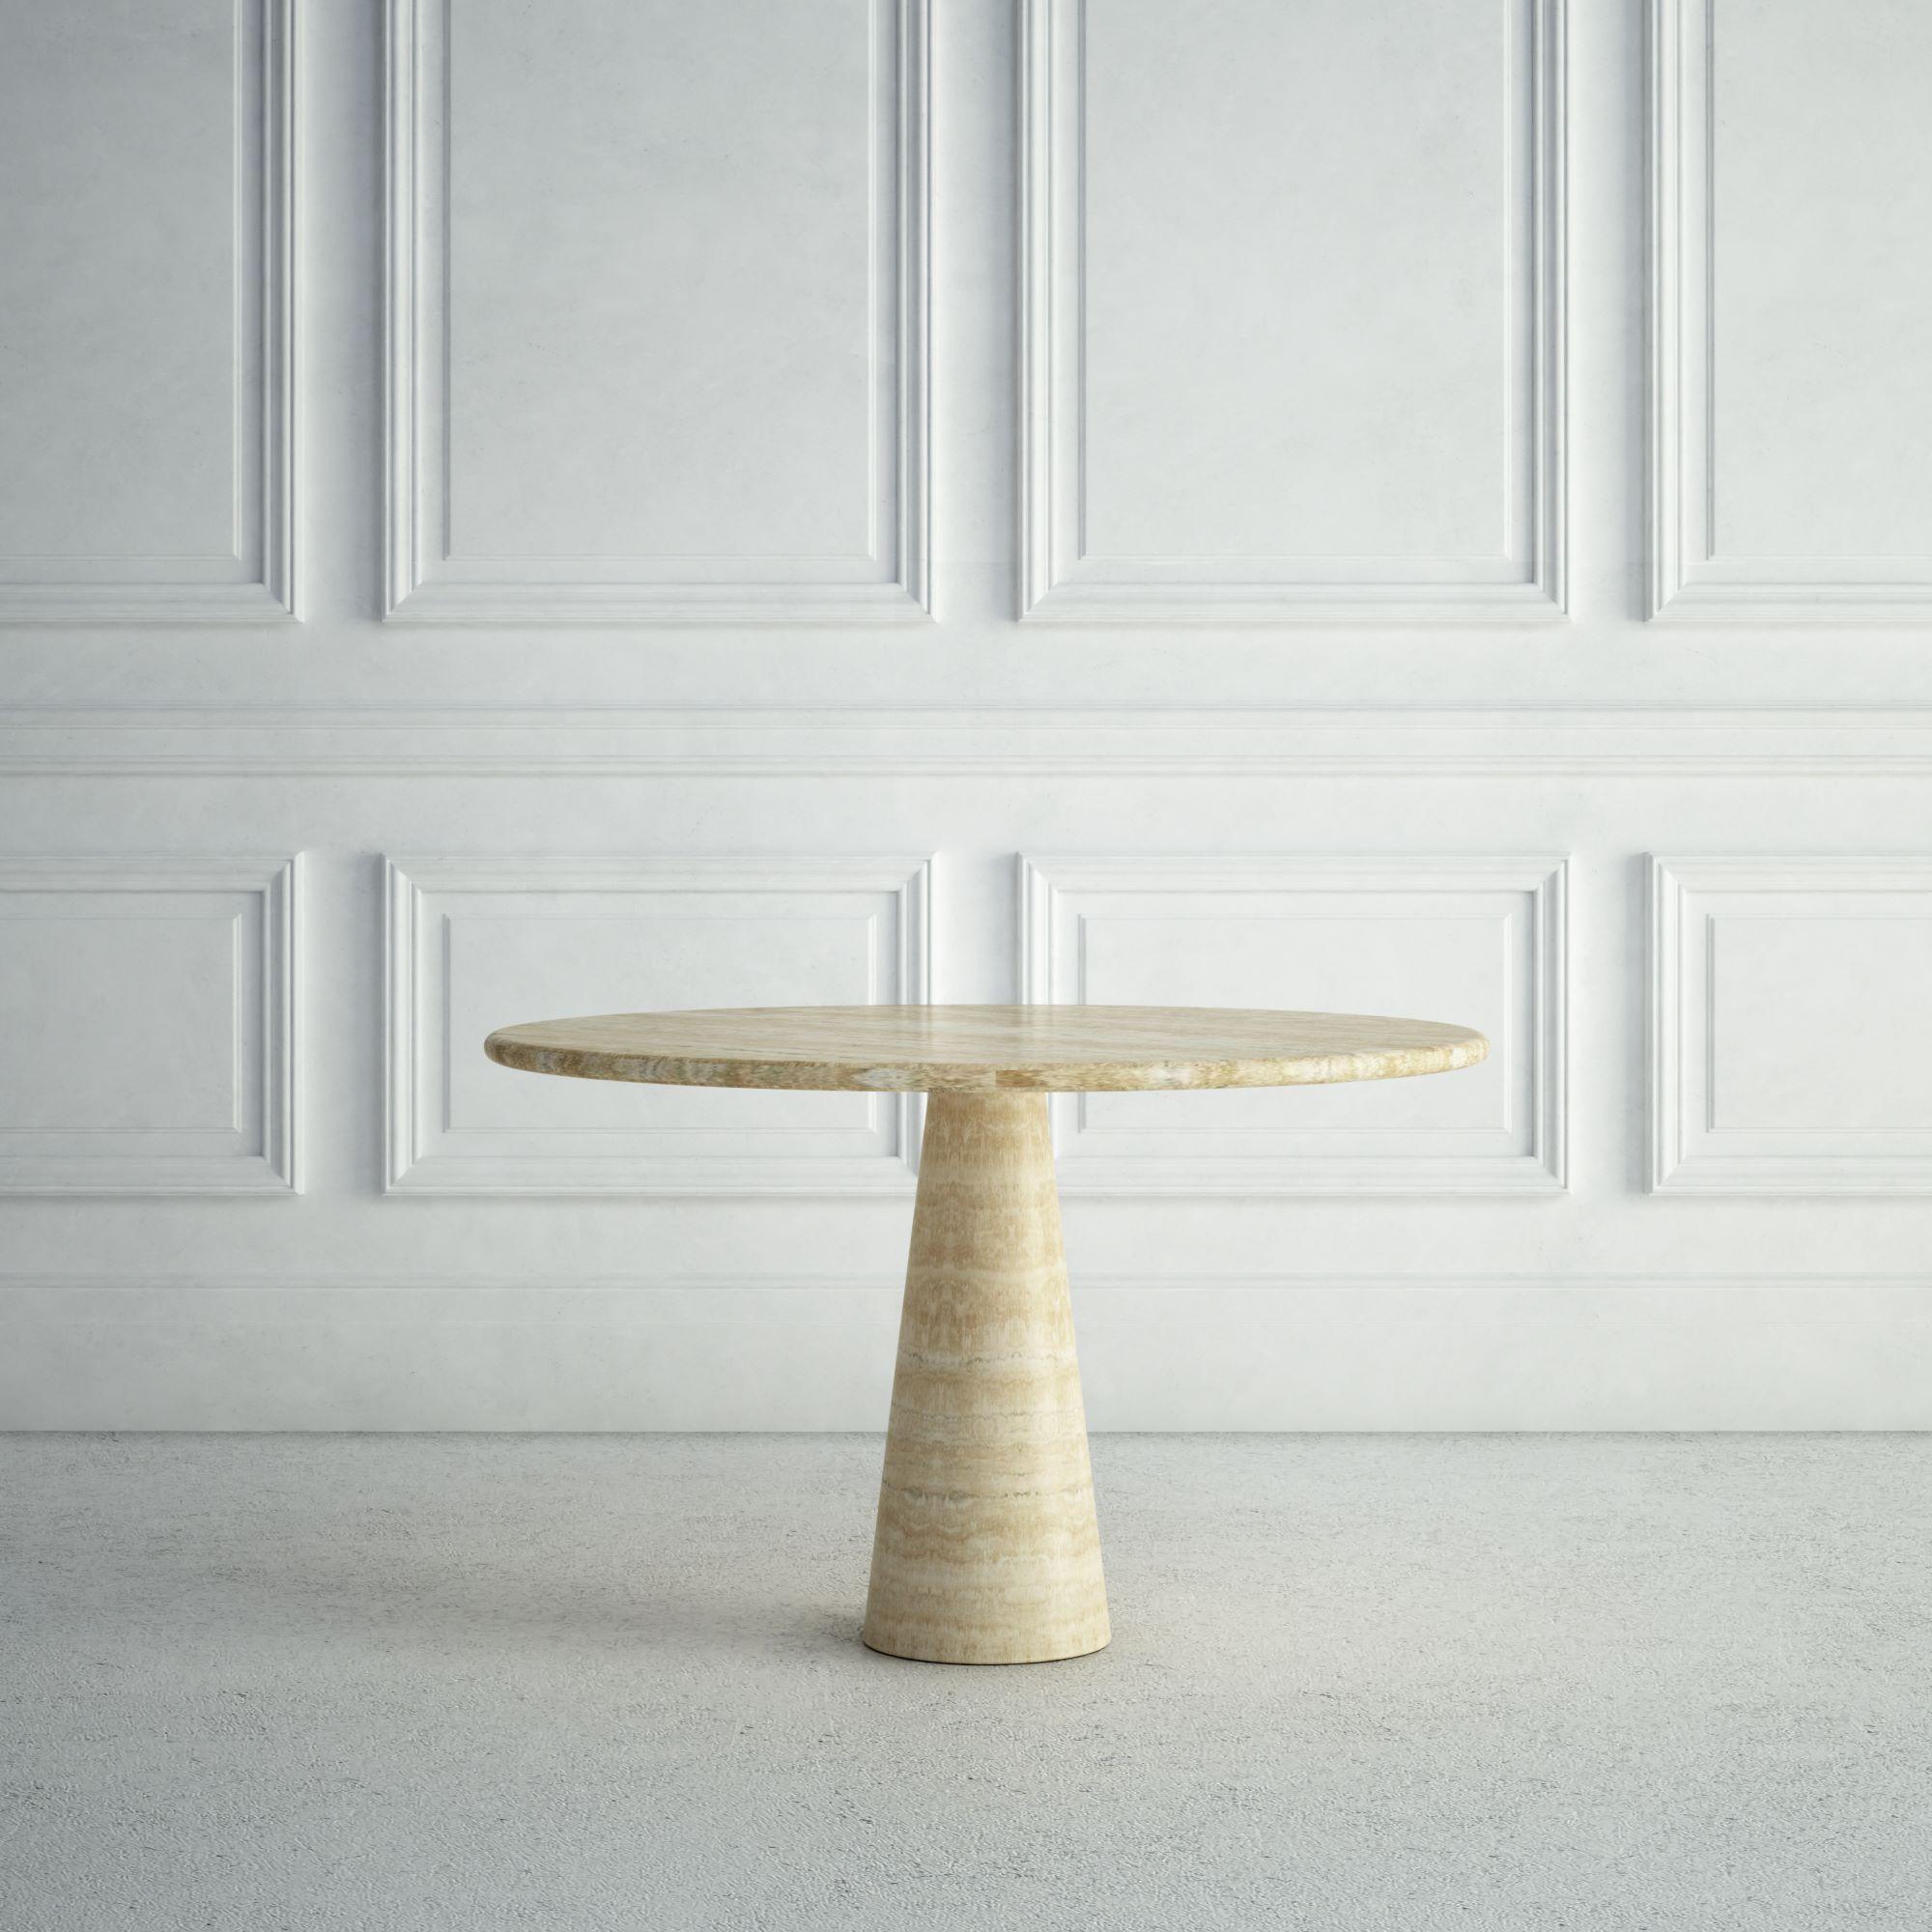 The Margaux is a smaller, modern stone dining table, with a round top, and a bullnose edge detail.  The base is also rounded, but tapers as it goes up, forming a playful conical shape.  All of these elements give it a stylish, modern, fun look.  The